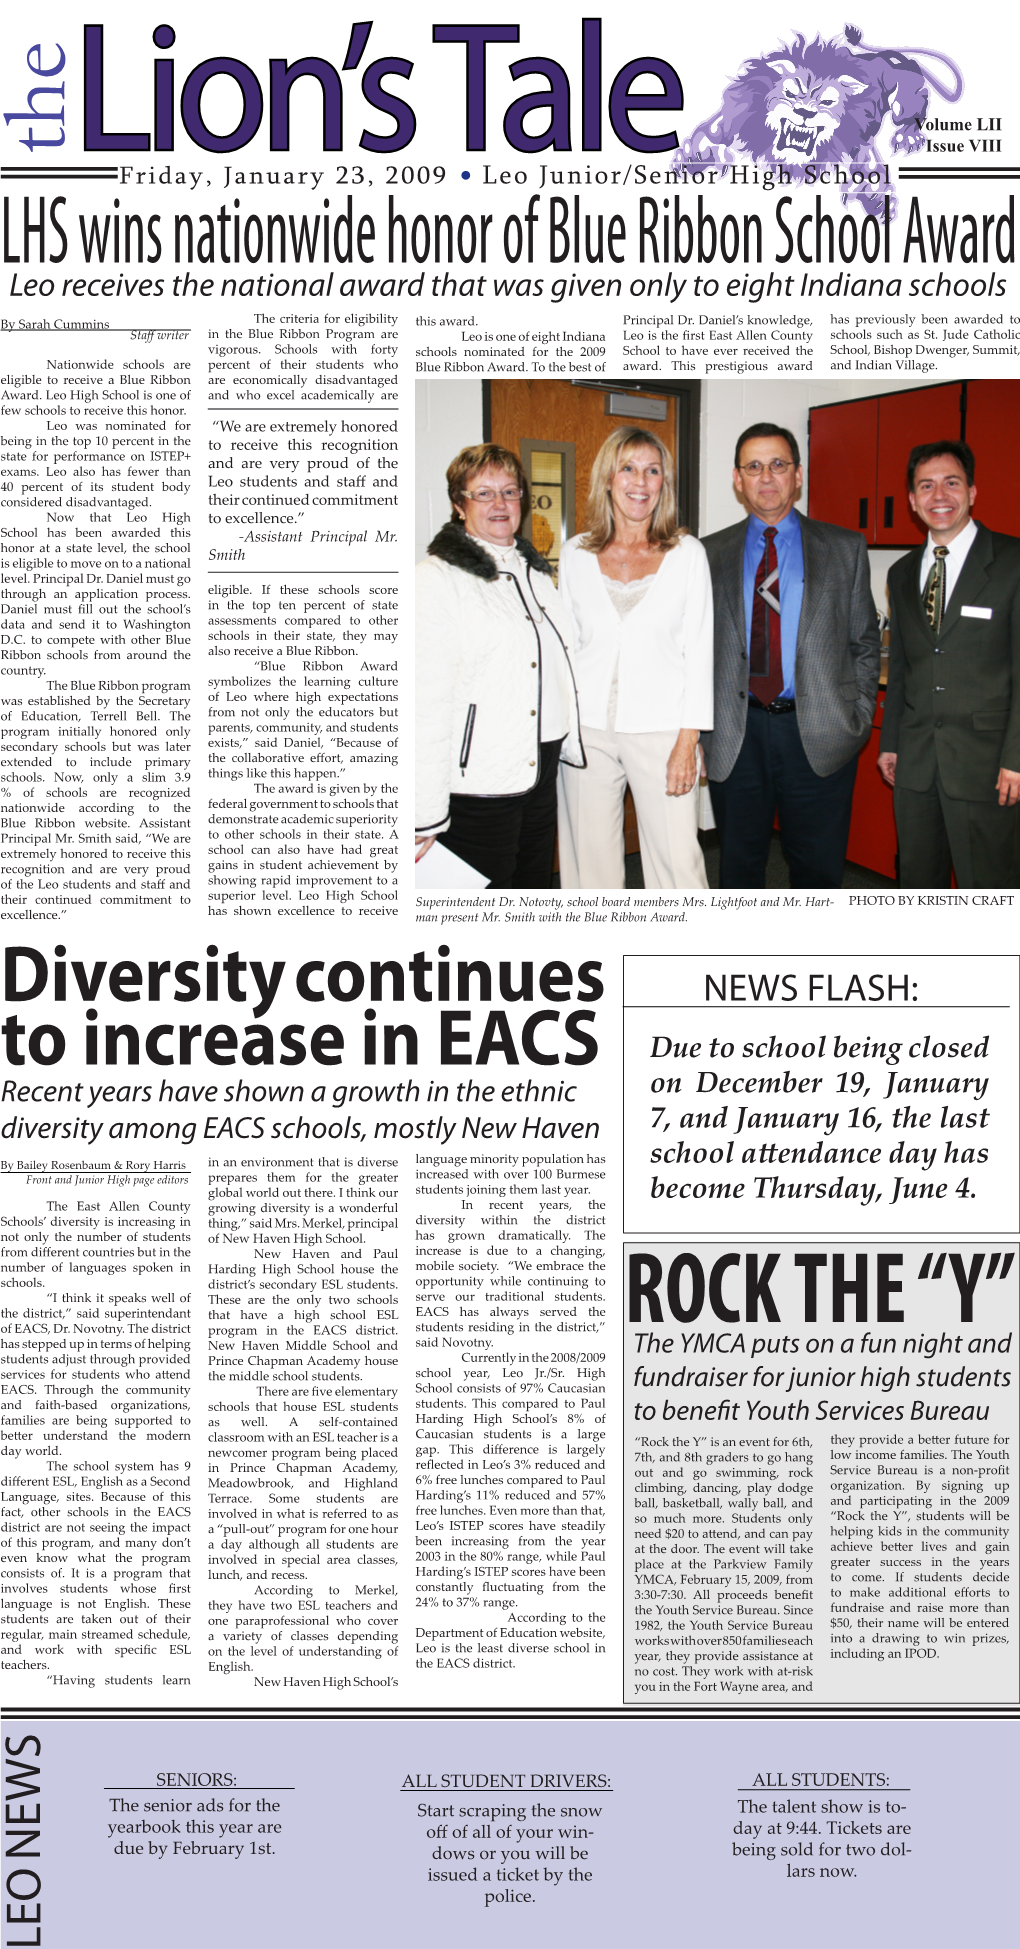 Diversity Continues to Increase in EACS